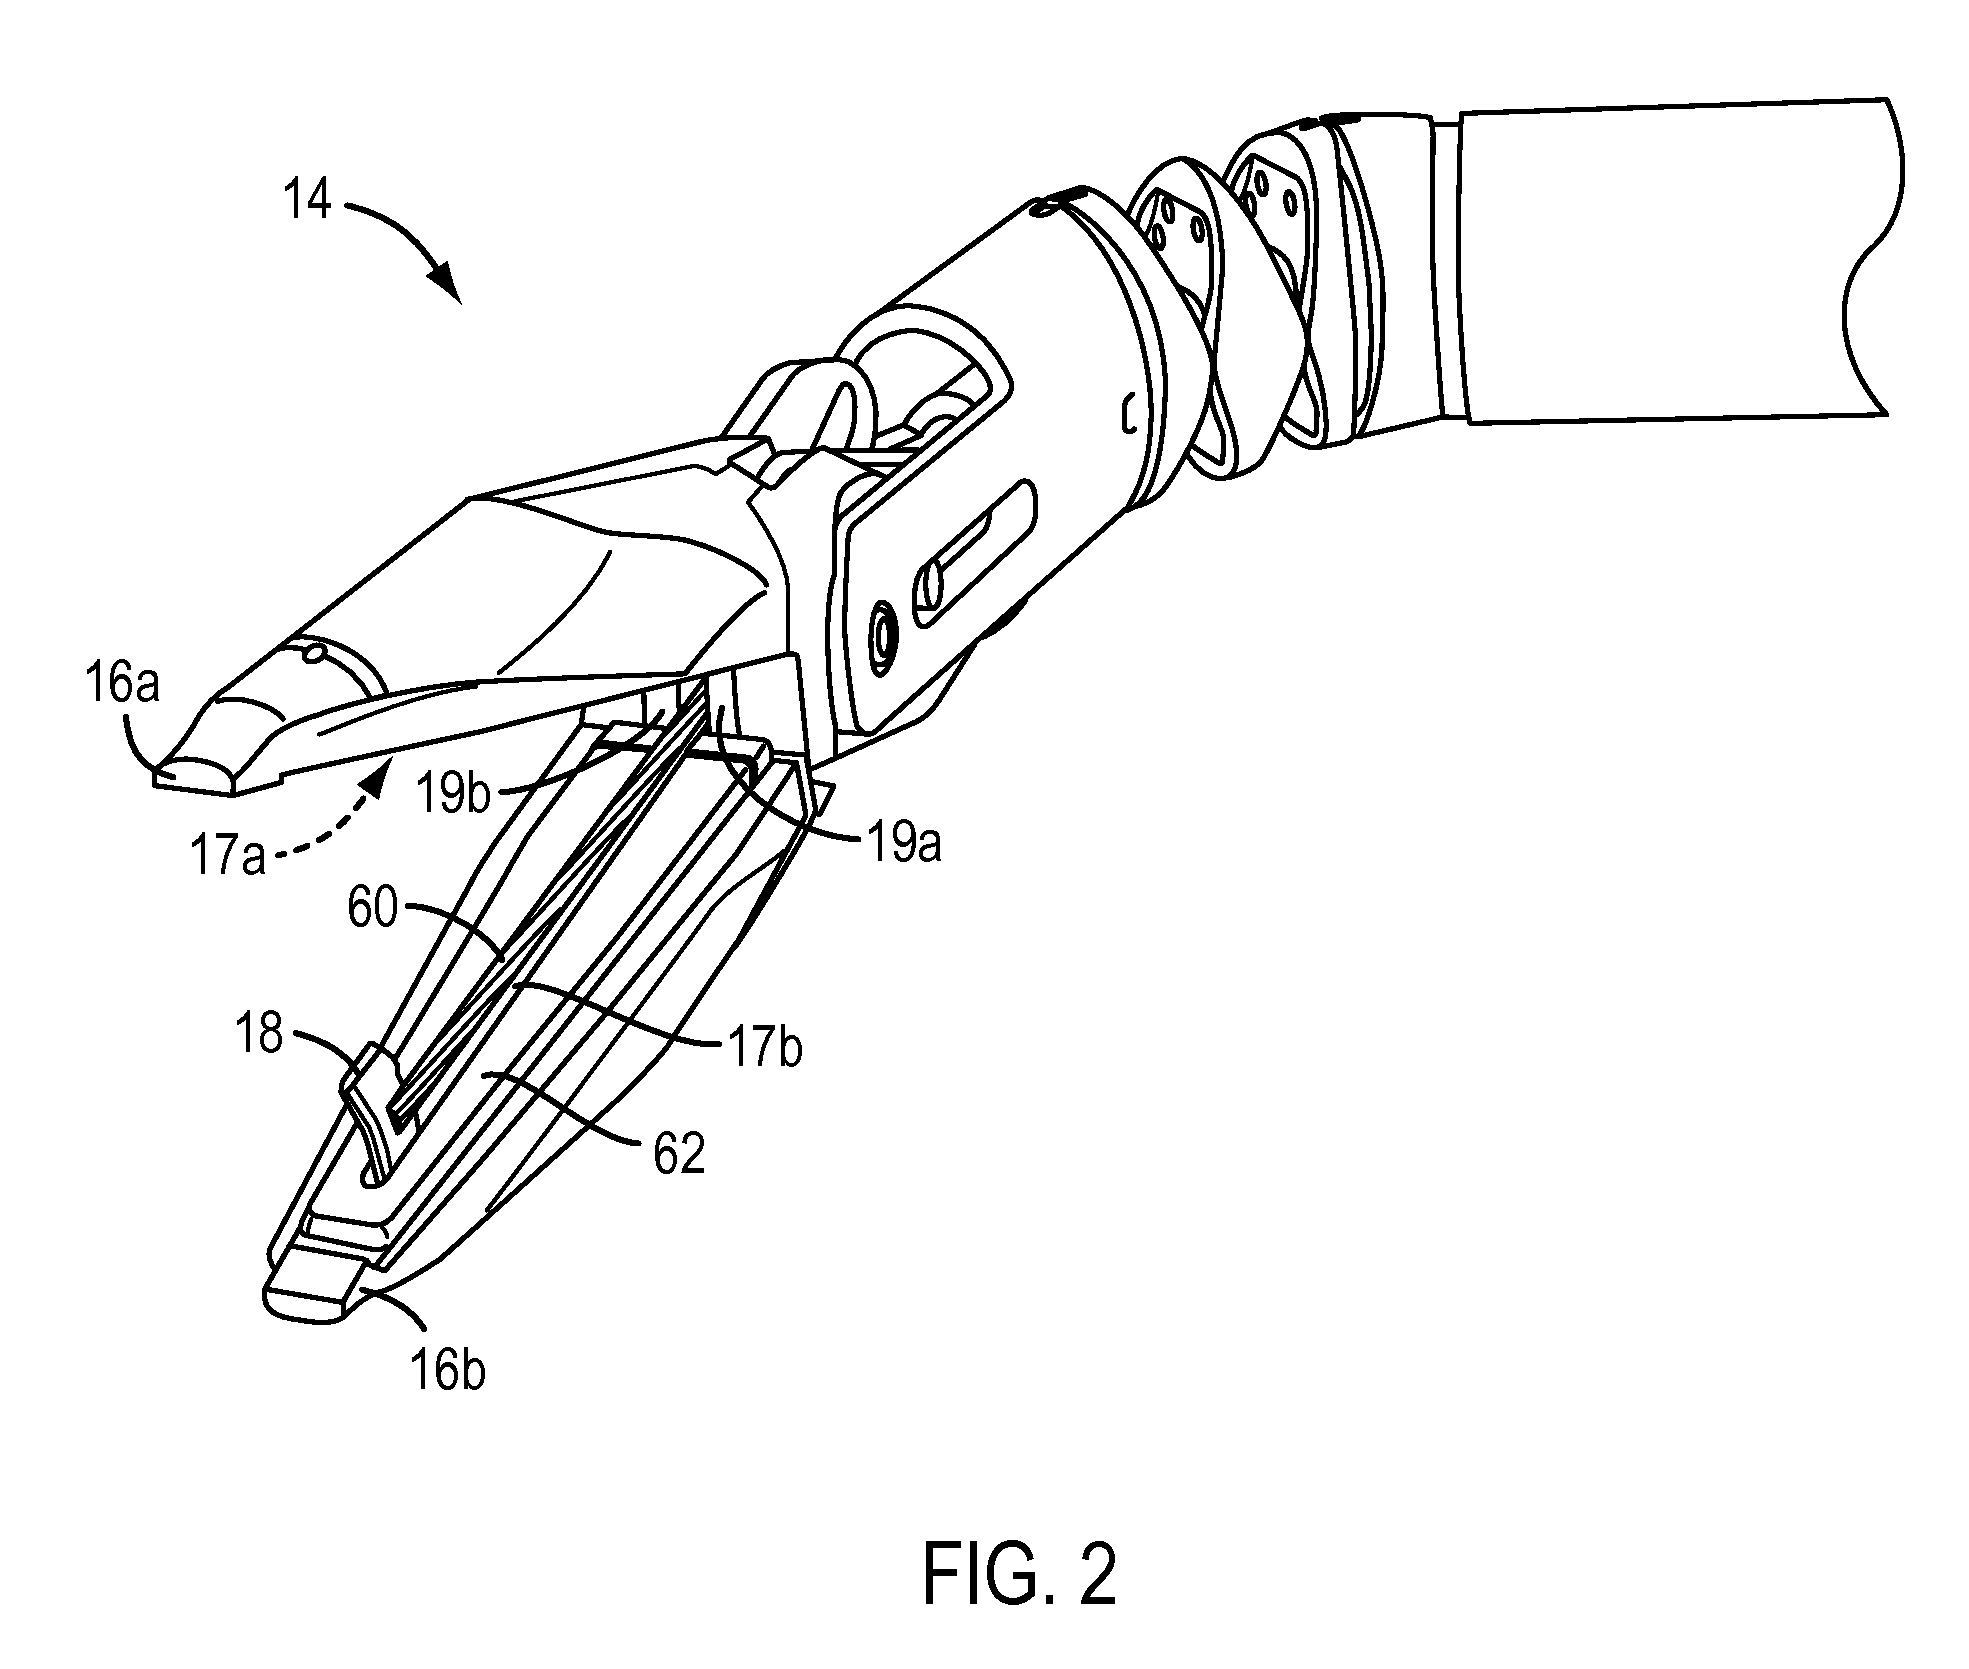 Surgical instrument with motor